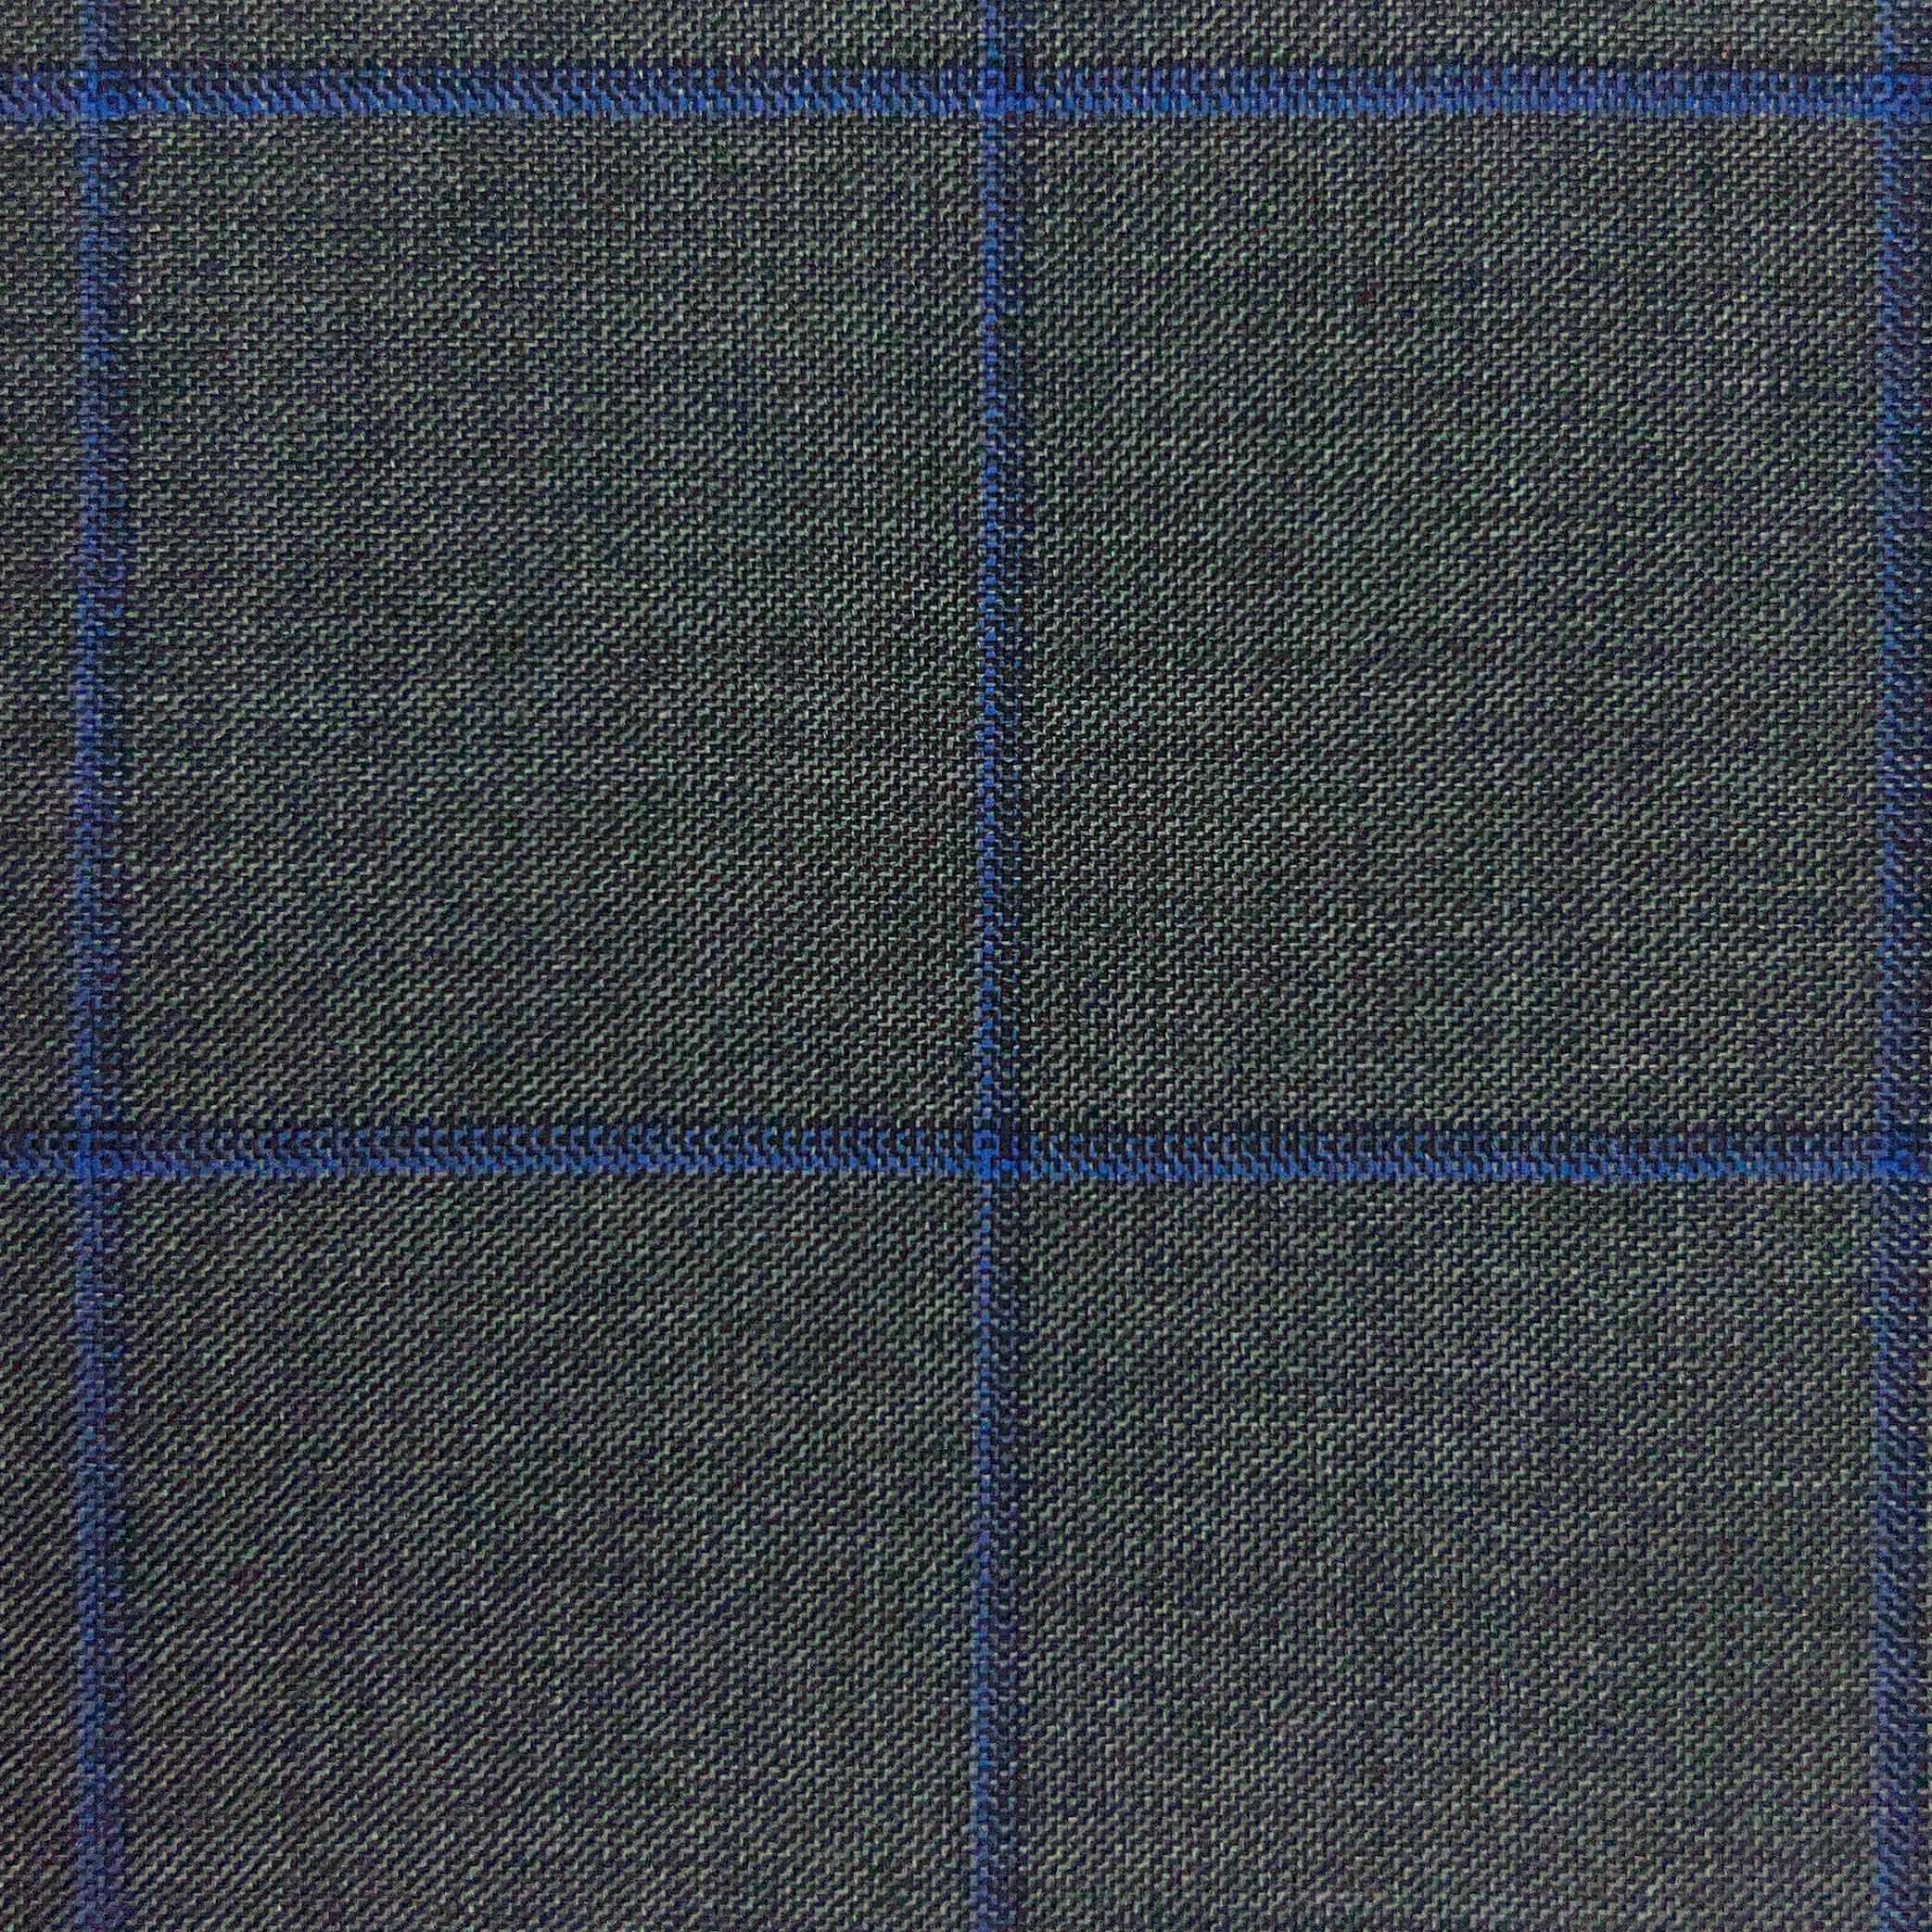 Westwood Hart Online Custom Hand Tailor Suits Sportcoats Trousers Waistcoats Overcoats Medium Grey With Royal Blue & Navy Windowpane Design